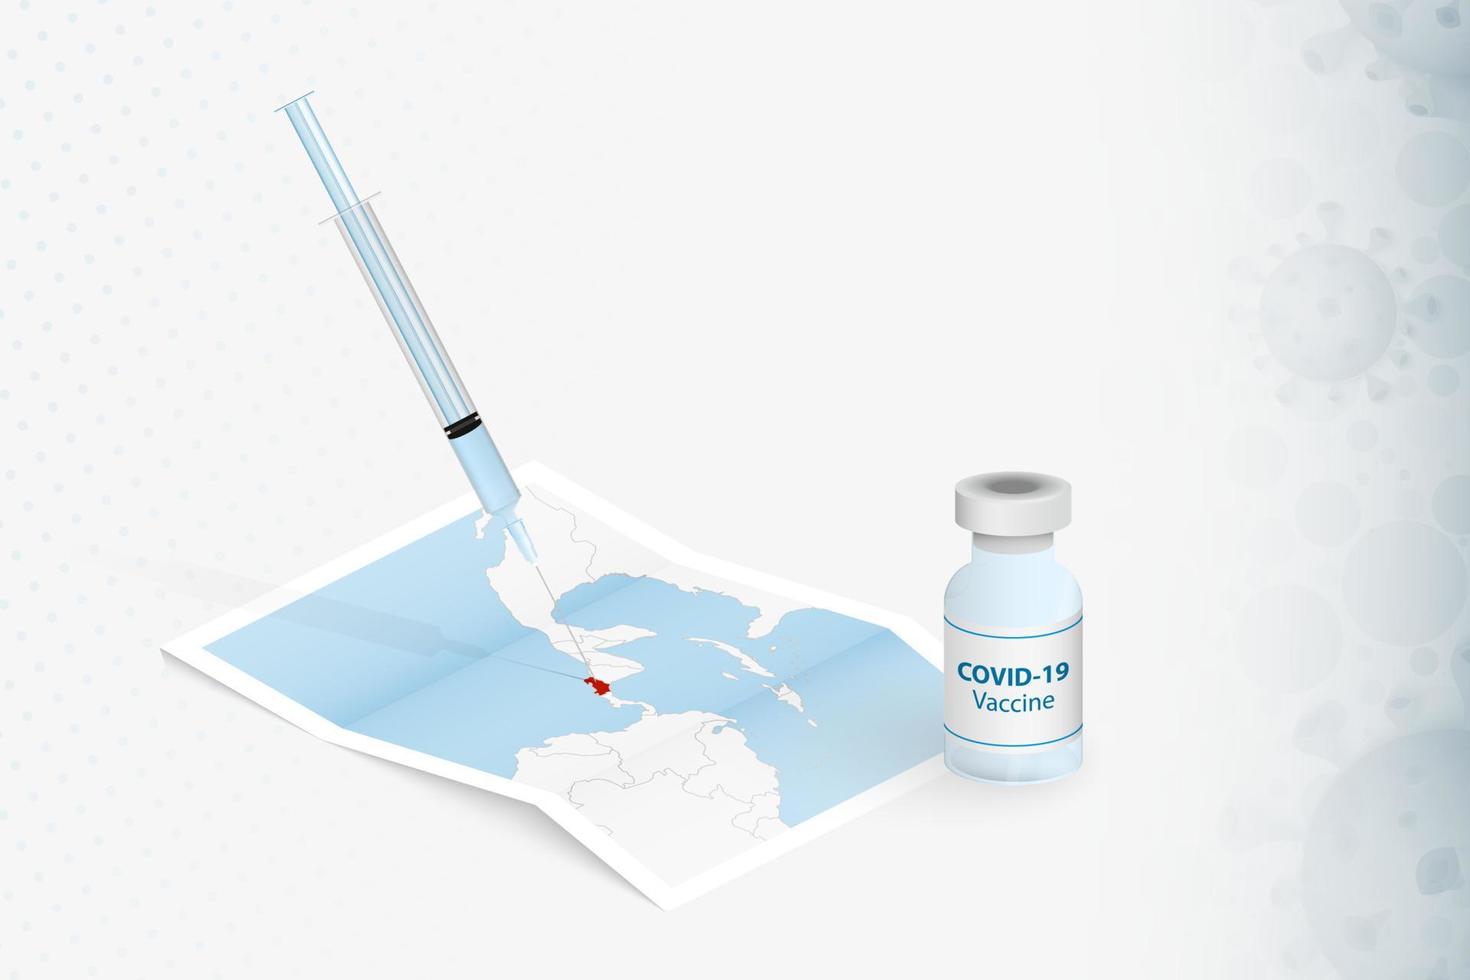 Costa Rica Vaccination, Injection with COVID-19 vaccine in Map of Costa Rica. vector